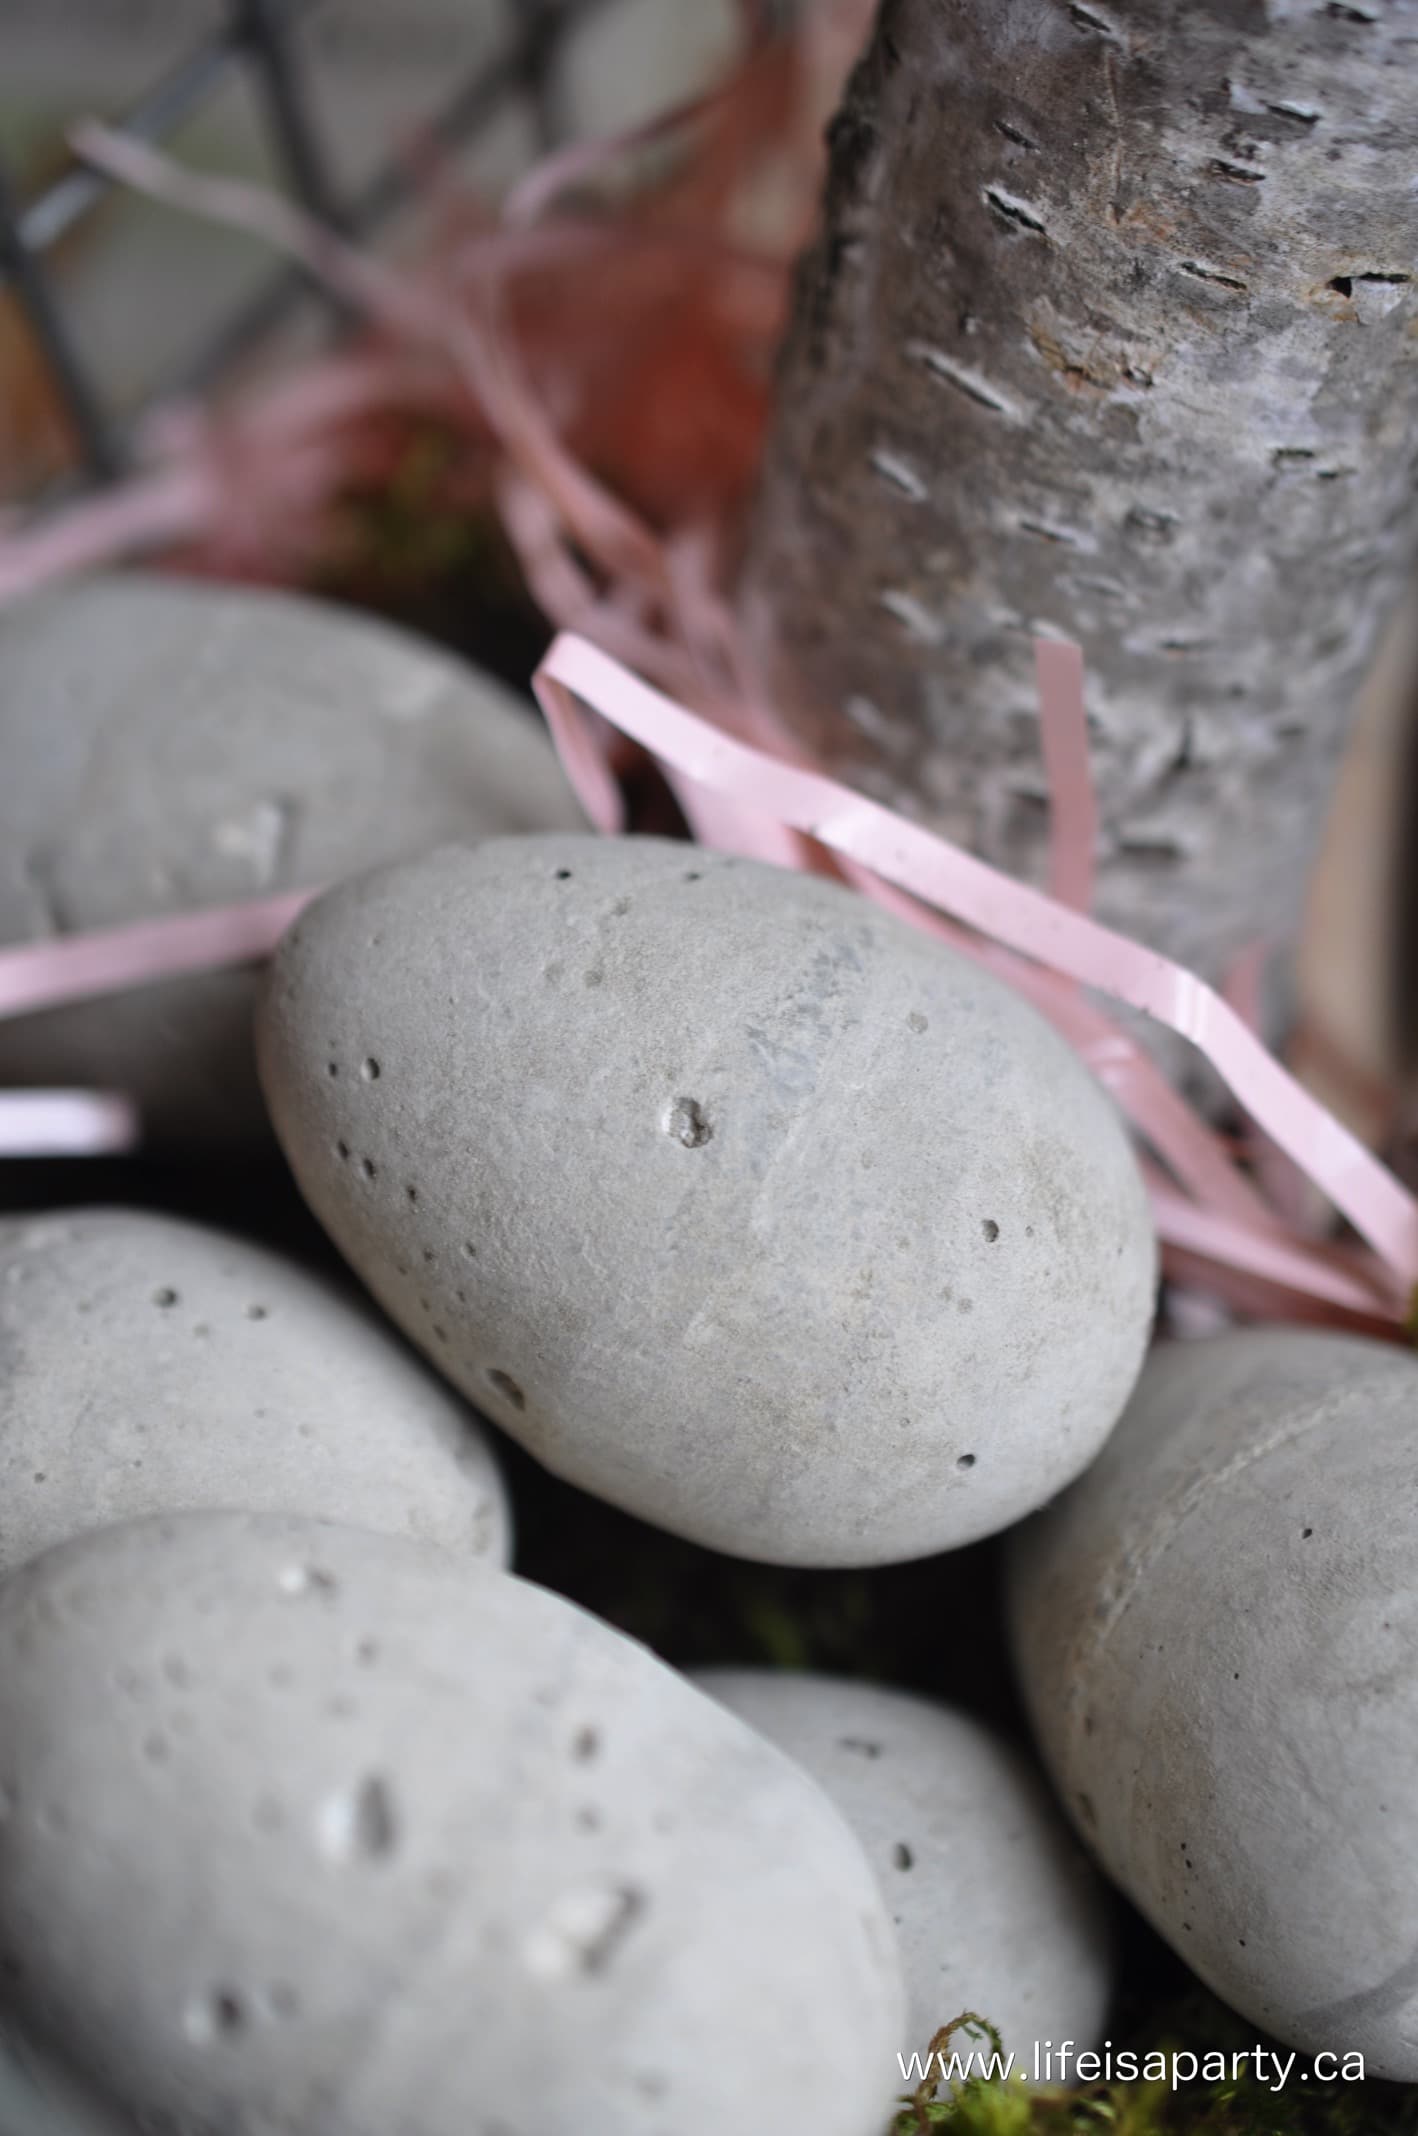 How To Make Cement Easter Eggs: See how to use plastic Easter eggs as moulds to make your own cement eggs.